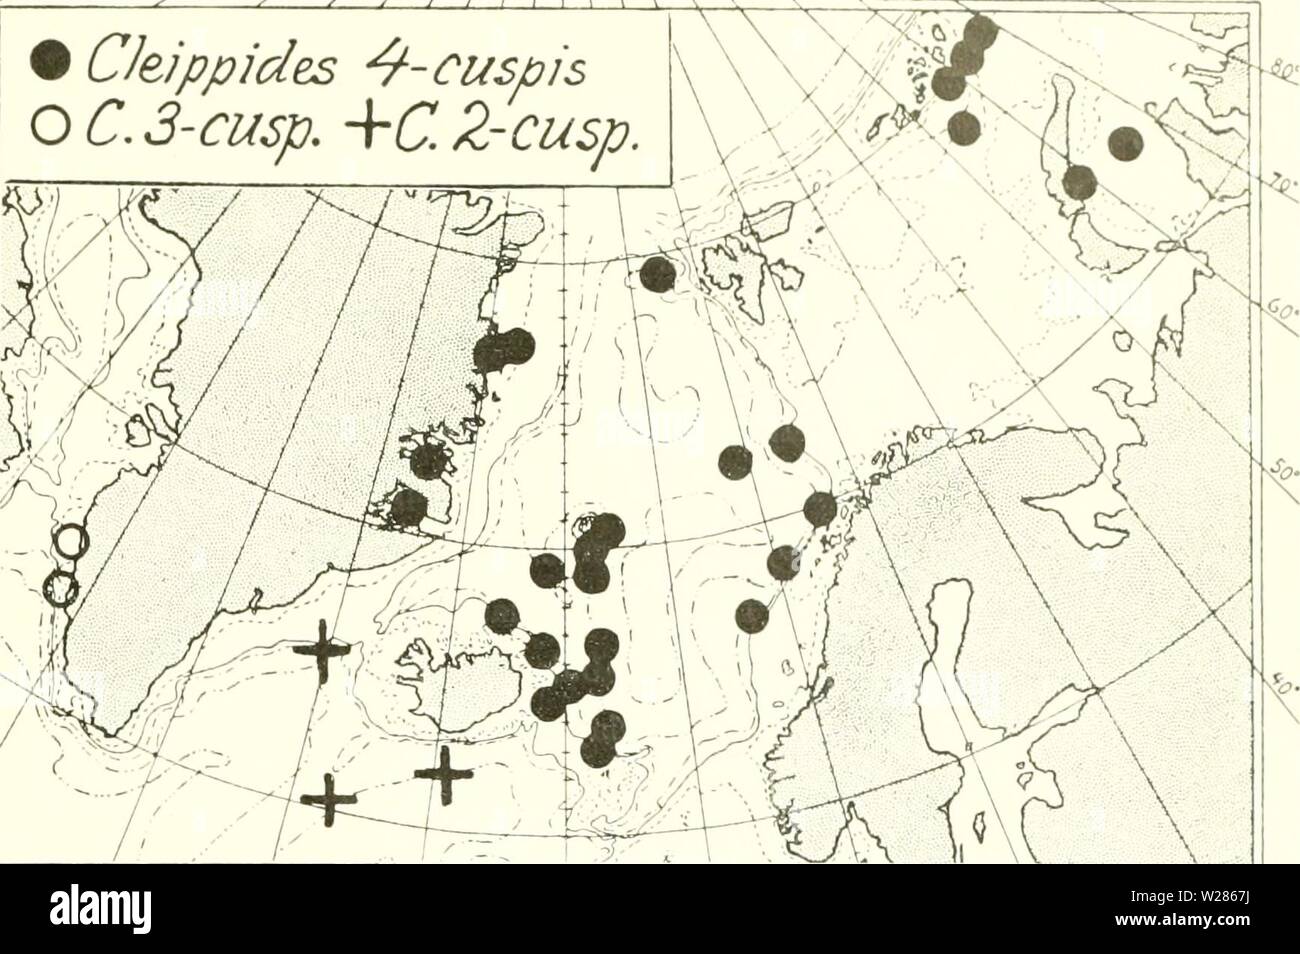 Archive image from page 368 of The Danish Ingolf-expedition (1899-1953). The Danish Ingolf-expedition  danishingolfex3cpt8daniuoft Year: 1899-1953  CRUSTACEA MALACOSTKACA. VII. 287 W Jitf Jtf yfr yt- â¢yS'ririlo-lfiY'- V Â£â /    CJeippides 4-cusp is O Â£â¢ J-7. +C Z-CUSp Chart 51. Cleippid.es, 4-cuspis, C. 3-cuspis, C. 2-cuspis Occurrence. The 'Ingolf' and other expeditions have secured this species at several stations. E.Greenland: Hurry Inlet, the mouth, room. 1 spec. (The E. Greenl. Exped. 11-8-1900). Forsblad Fjord, abt. 100 m., 1 $ ovig., and abt. 185â100 m., stones with clay and gravel, Stock Photo